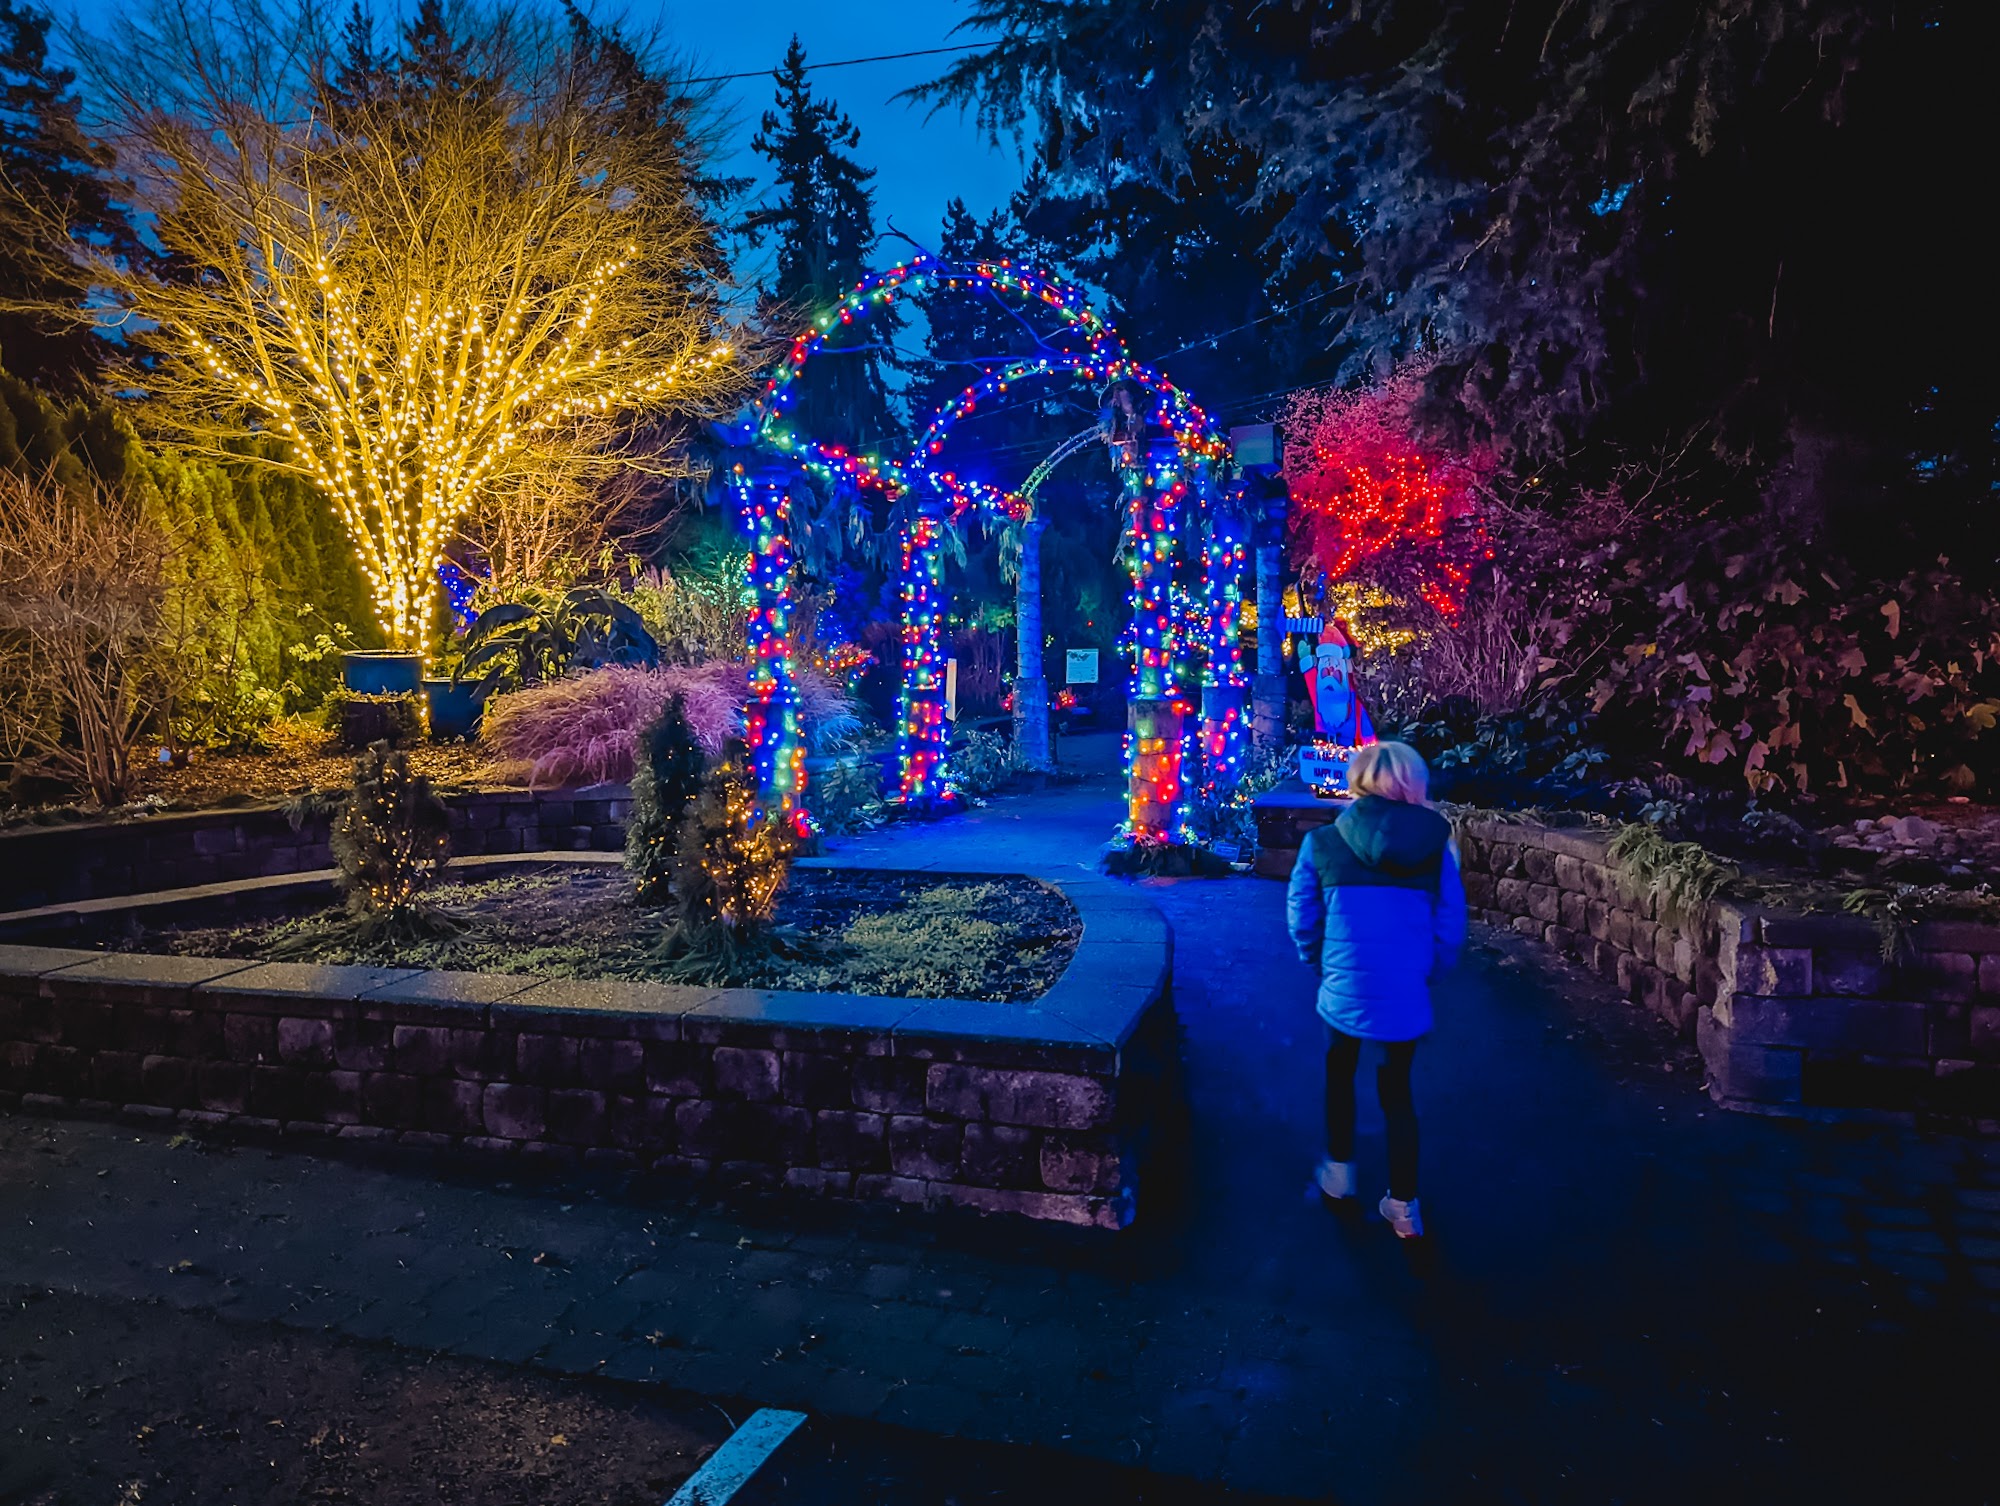 A child walks among the lights at Everegreen Arboretum's Wintertide Lights display in Everett, Wash., near Seattle, among free fun for families this holiday season